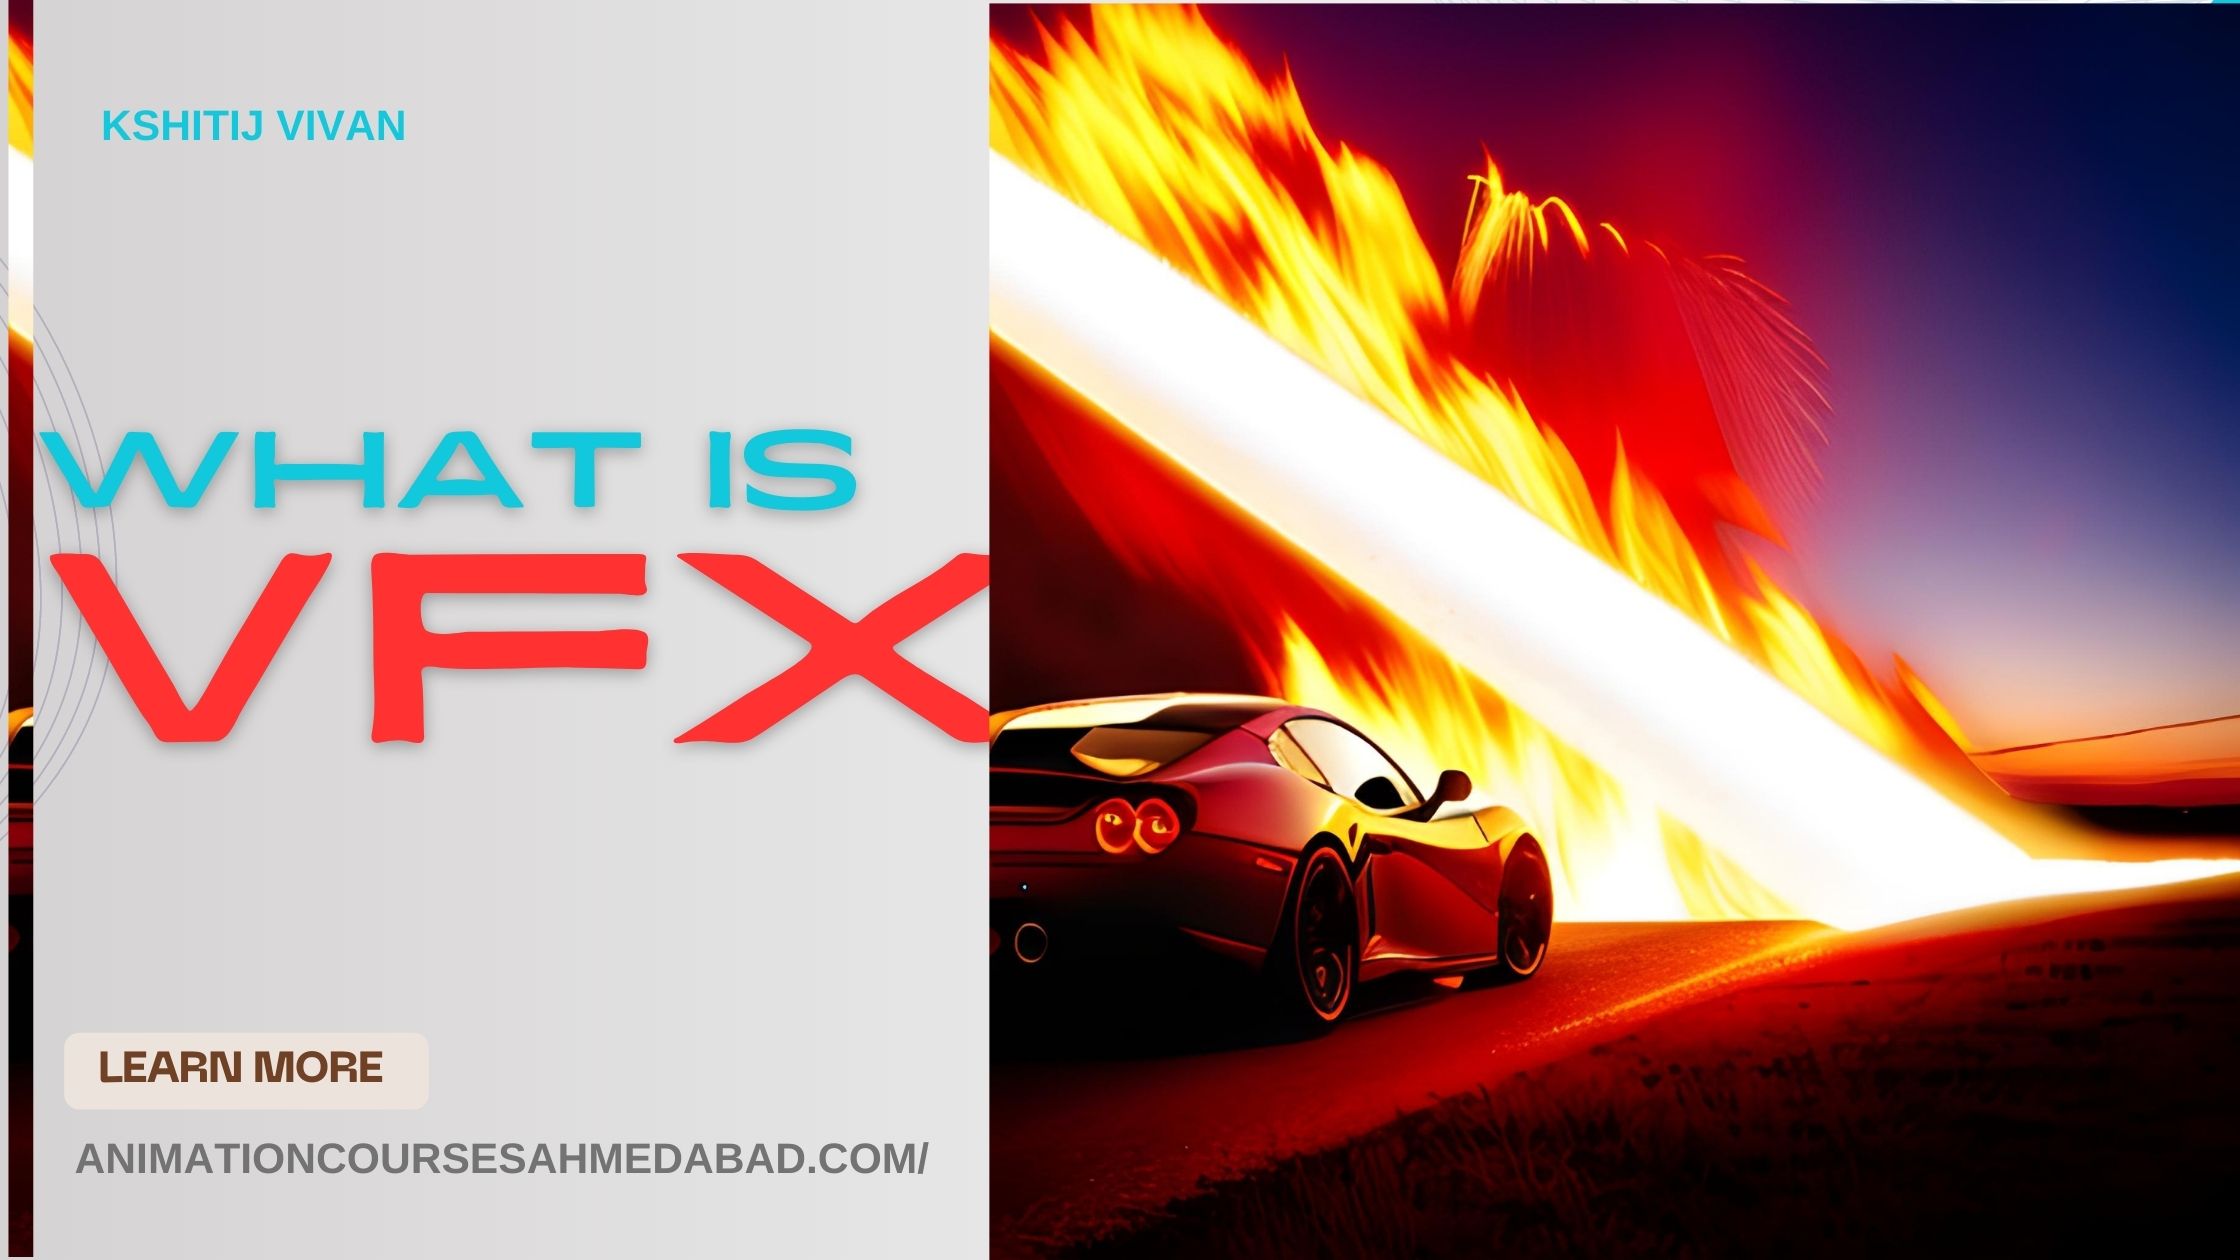 What Is VFX? Explained Definition, Types, Uses, Process, & Career